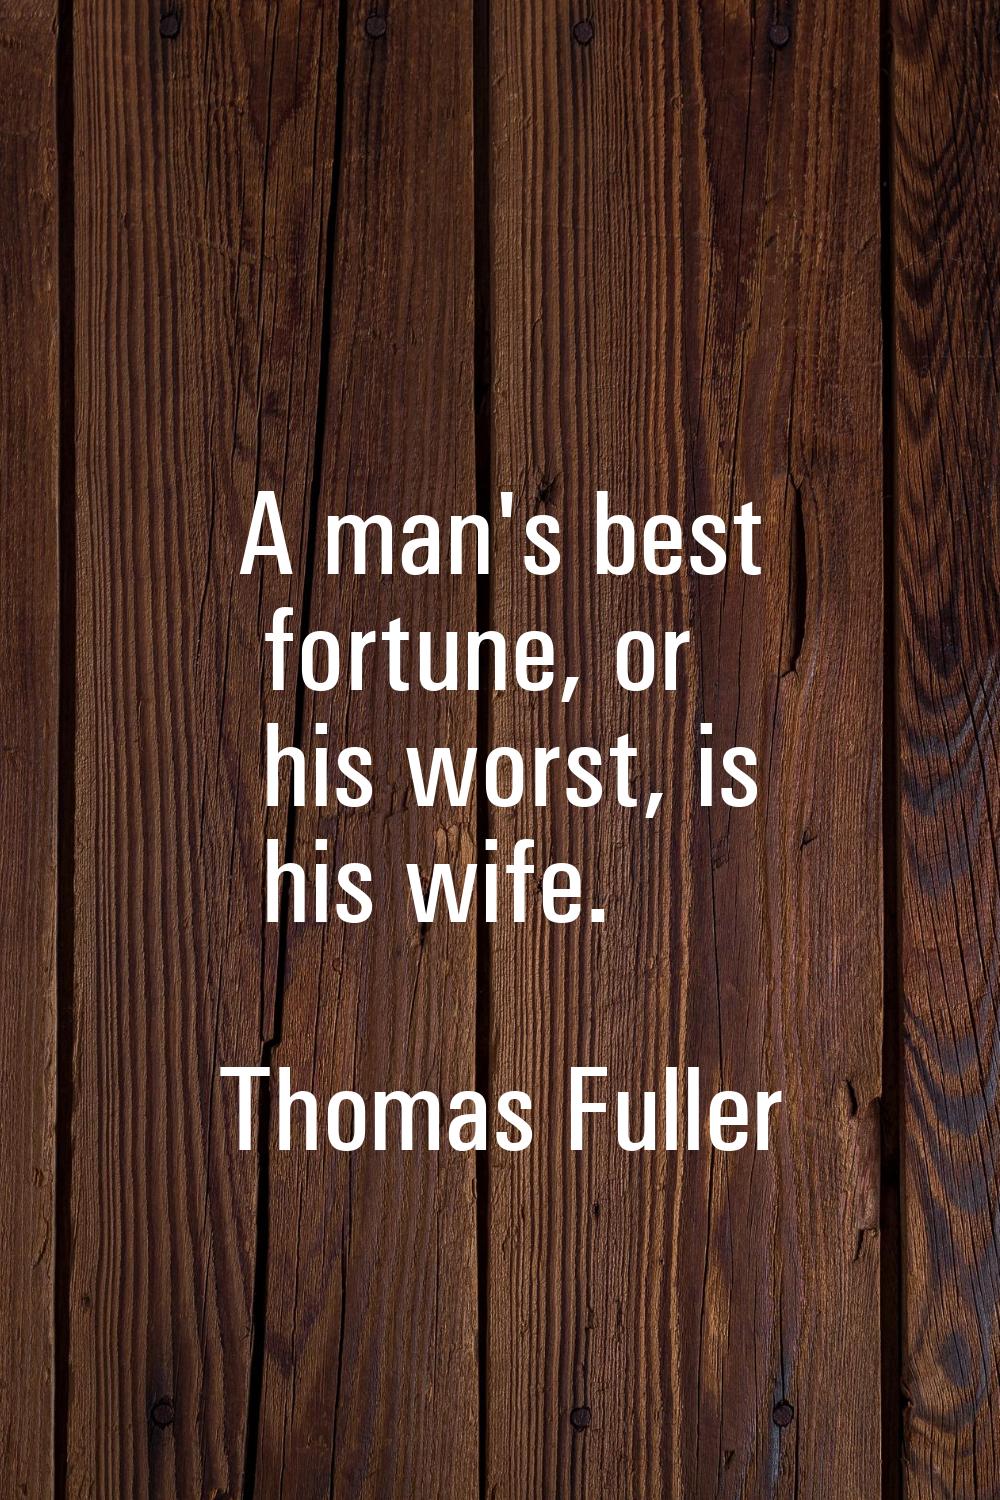 A man's best fortune, or his worst, is his wife.